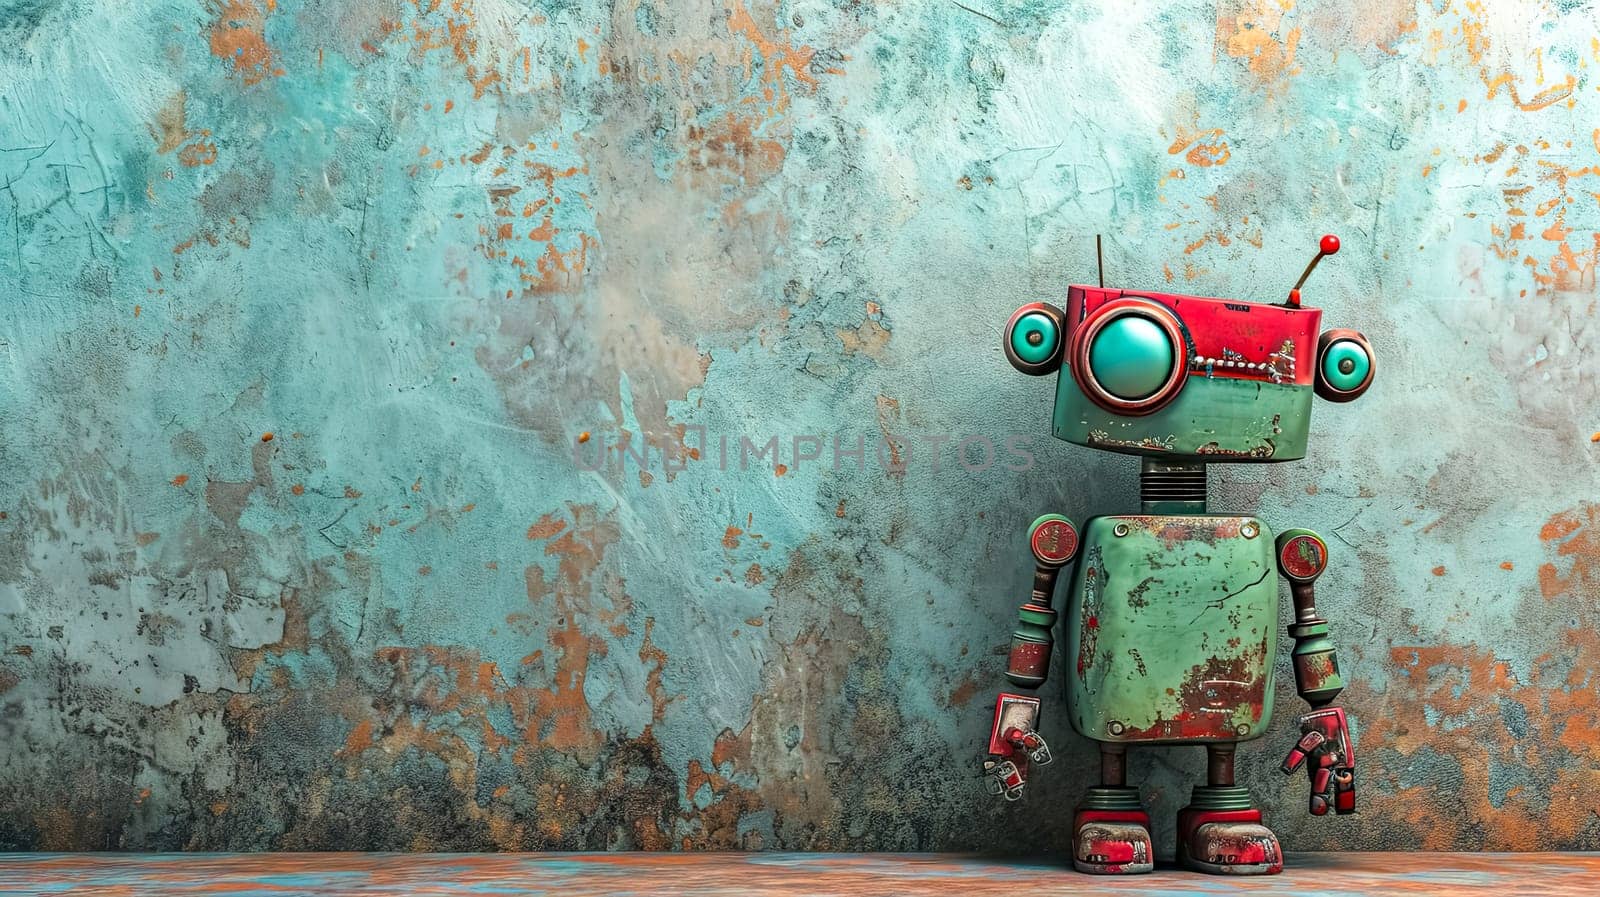 vintage robot with a green body and red details, standing in front of a textured turquoise and rust-colored wall. copy space